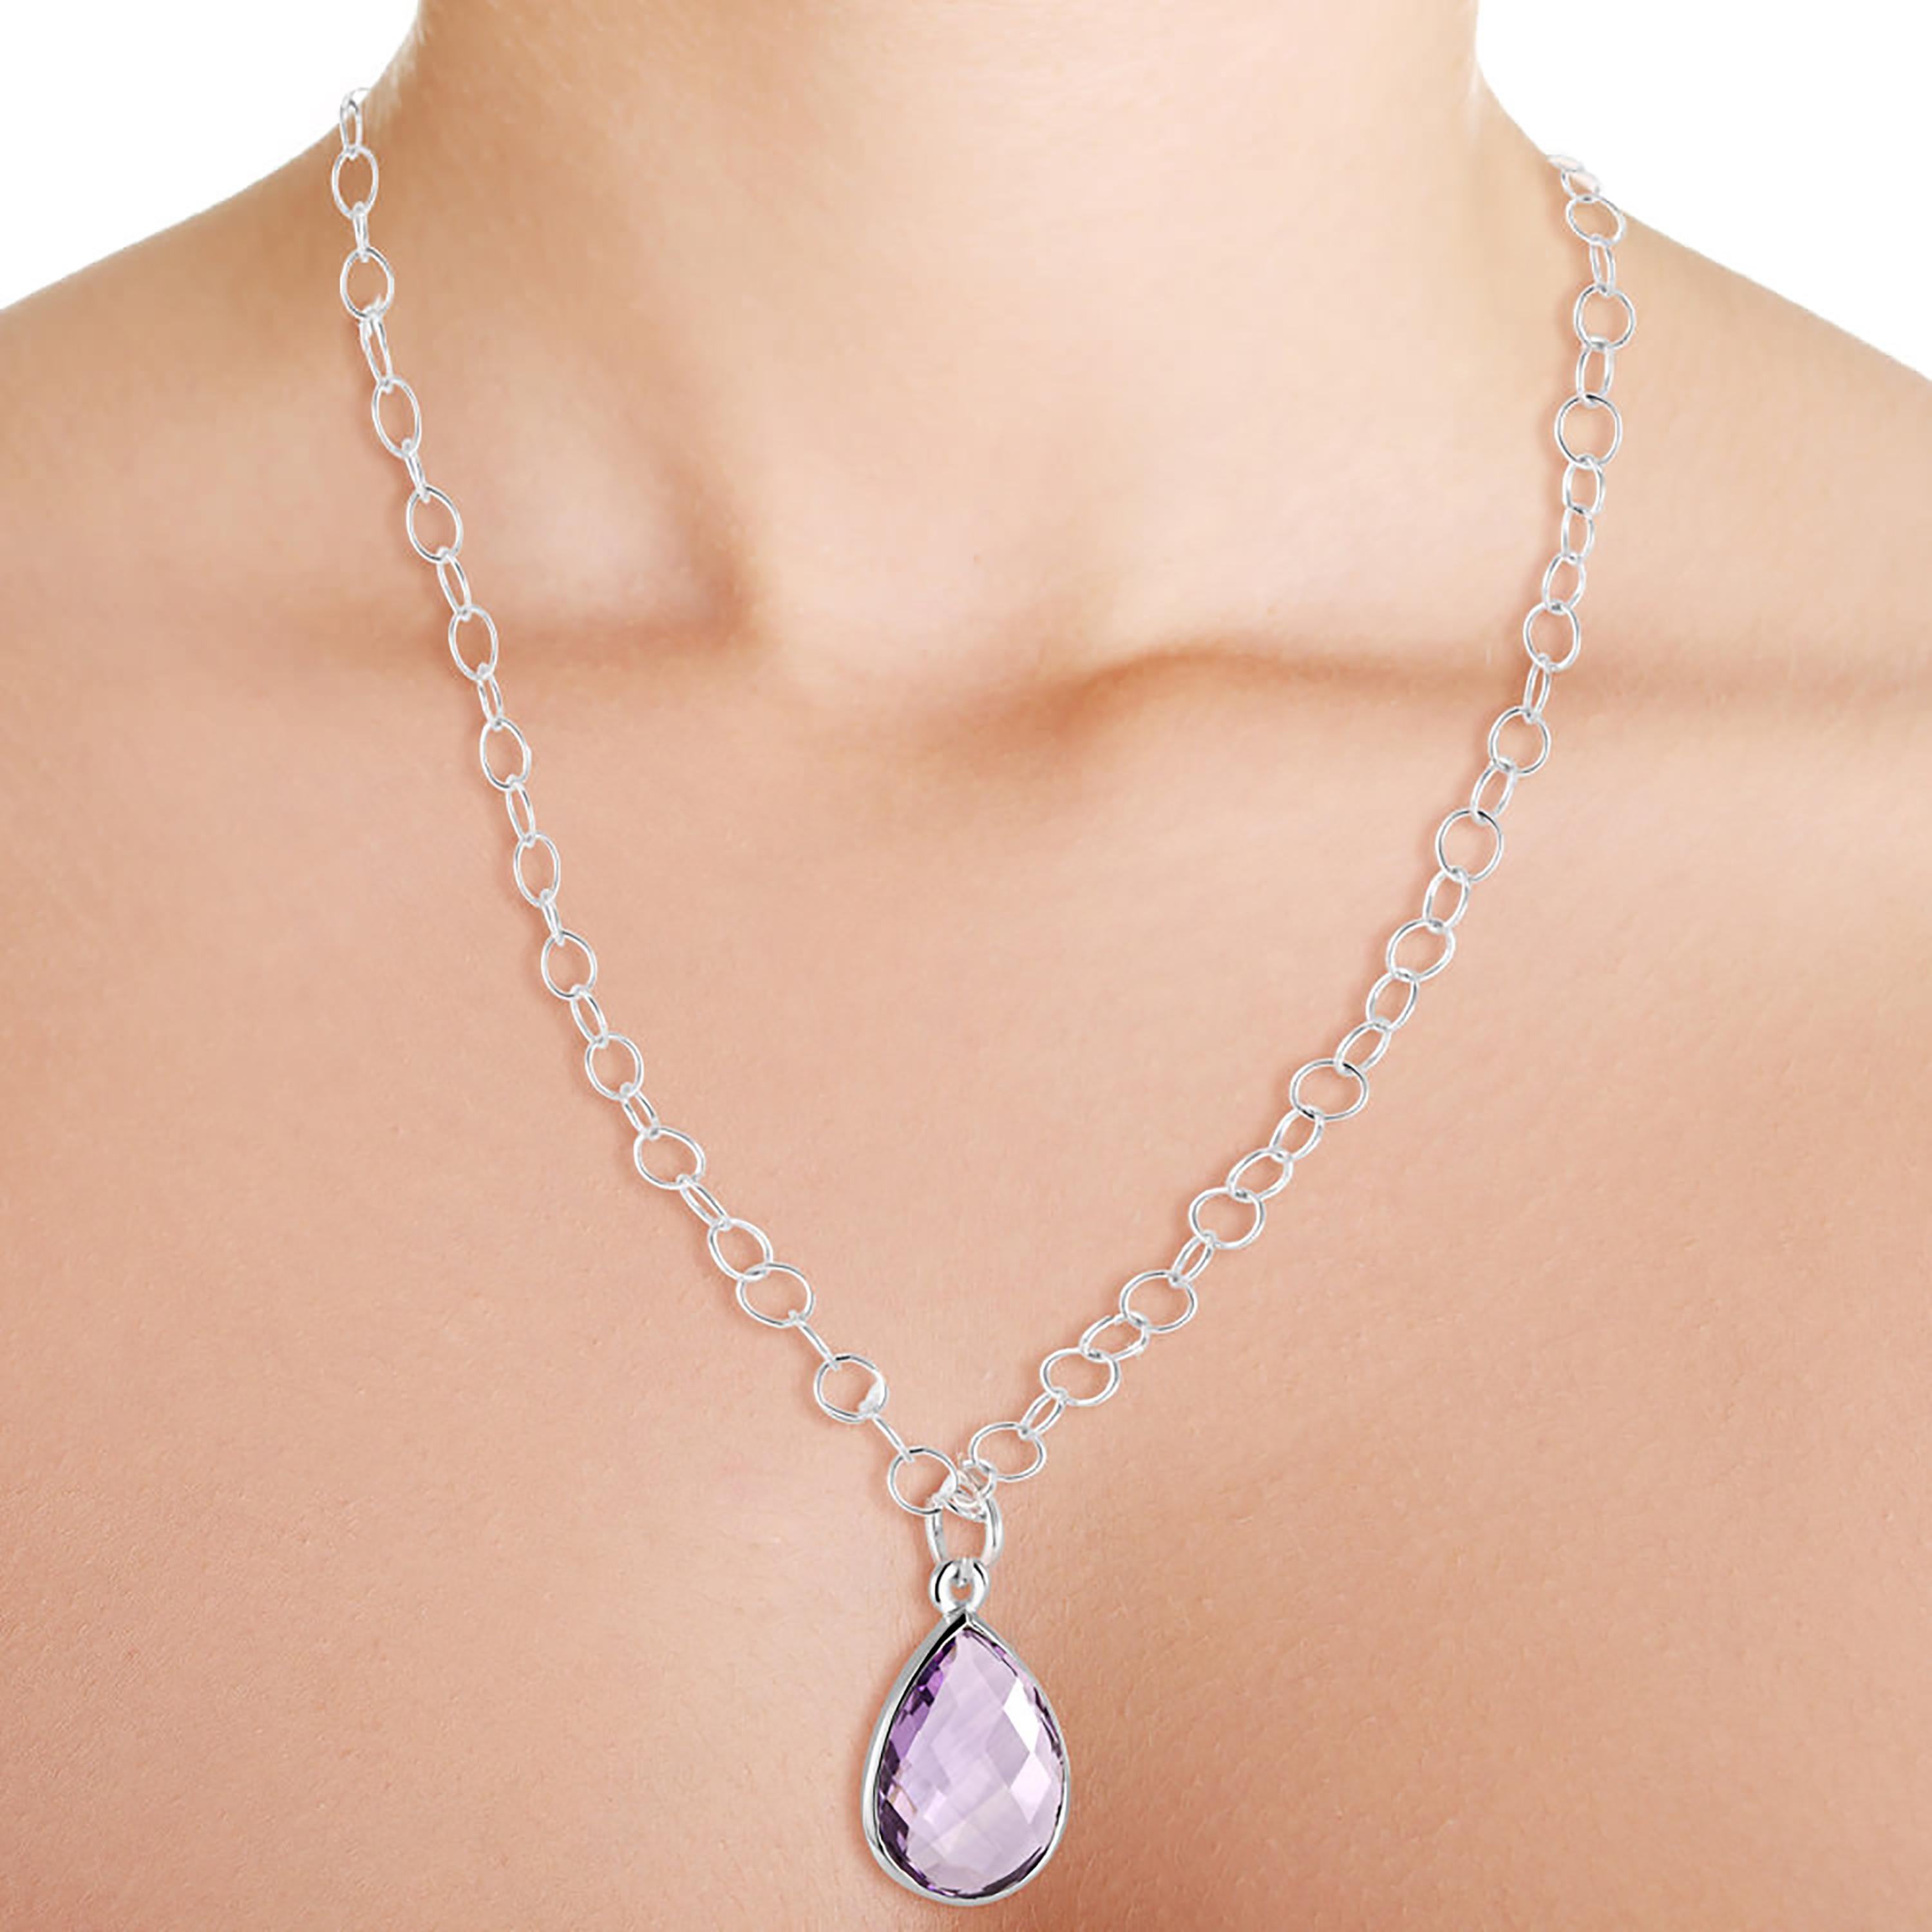 Pear Cut Double Sided Briolette Pear Shaped Amethyst Silver Pendant Necklace